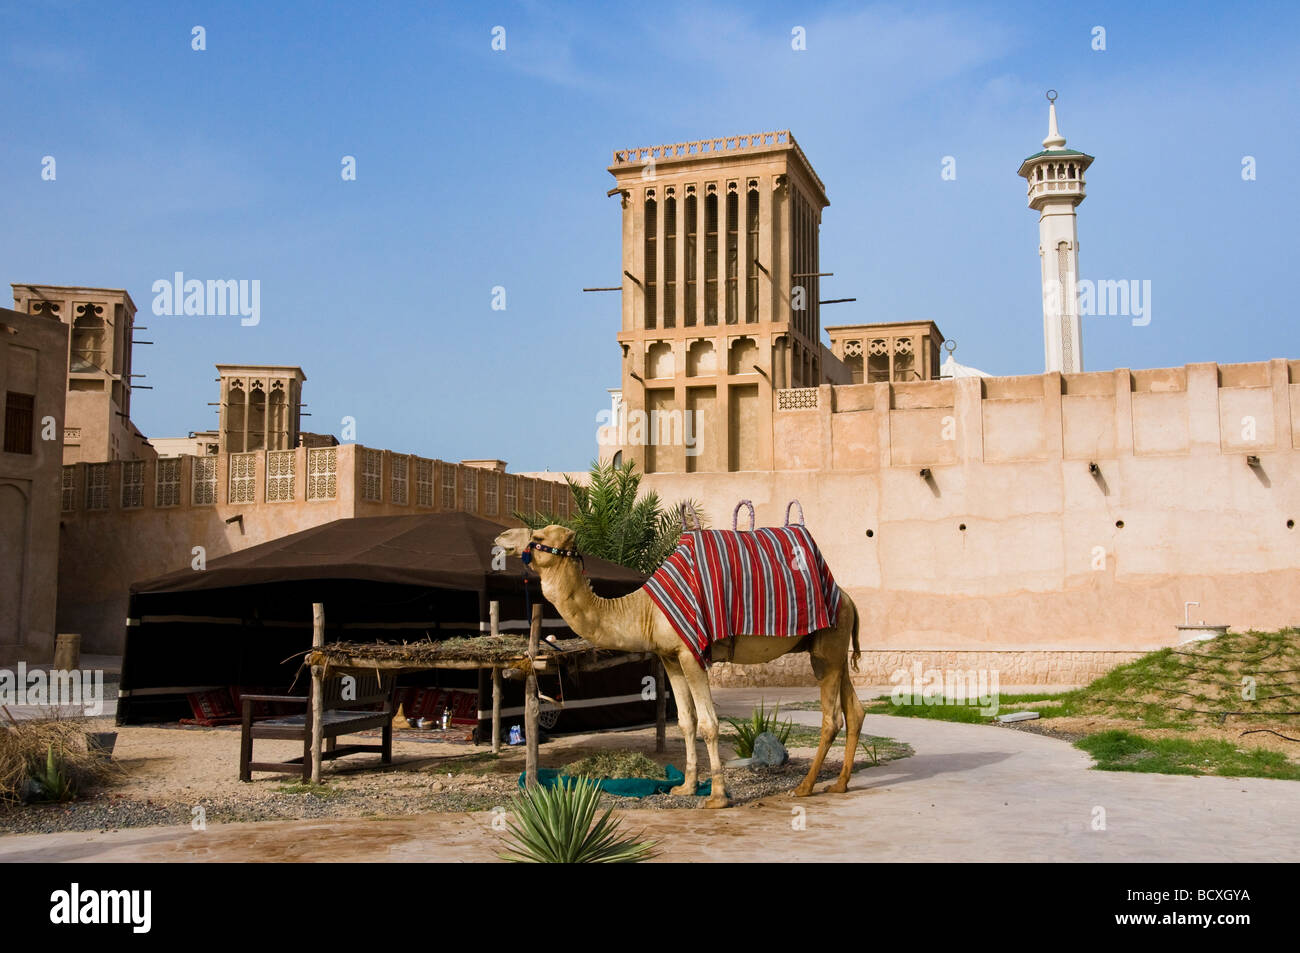 Traditional wind towers, bedouin tent and camel in the historical district of Bastakia Dubai Stock Photo